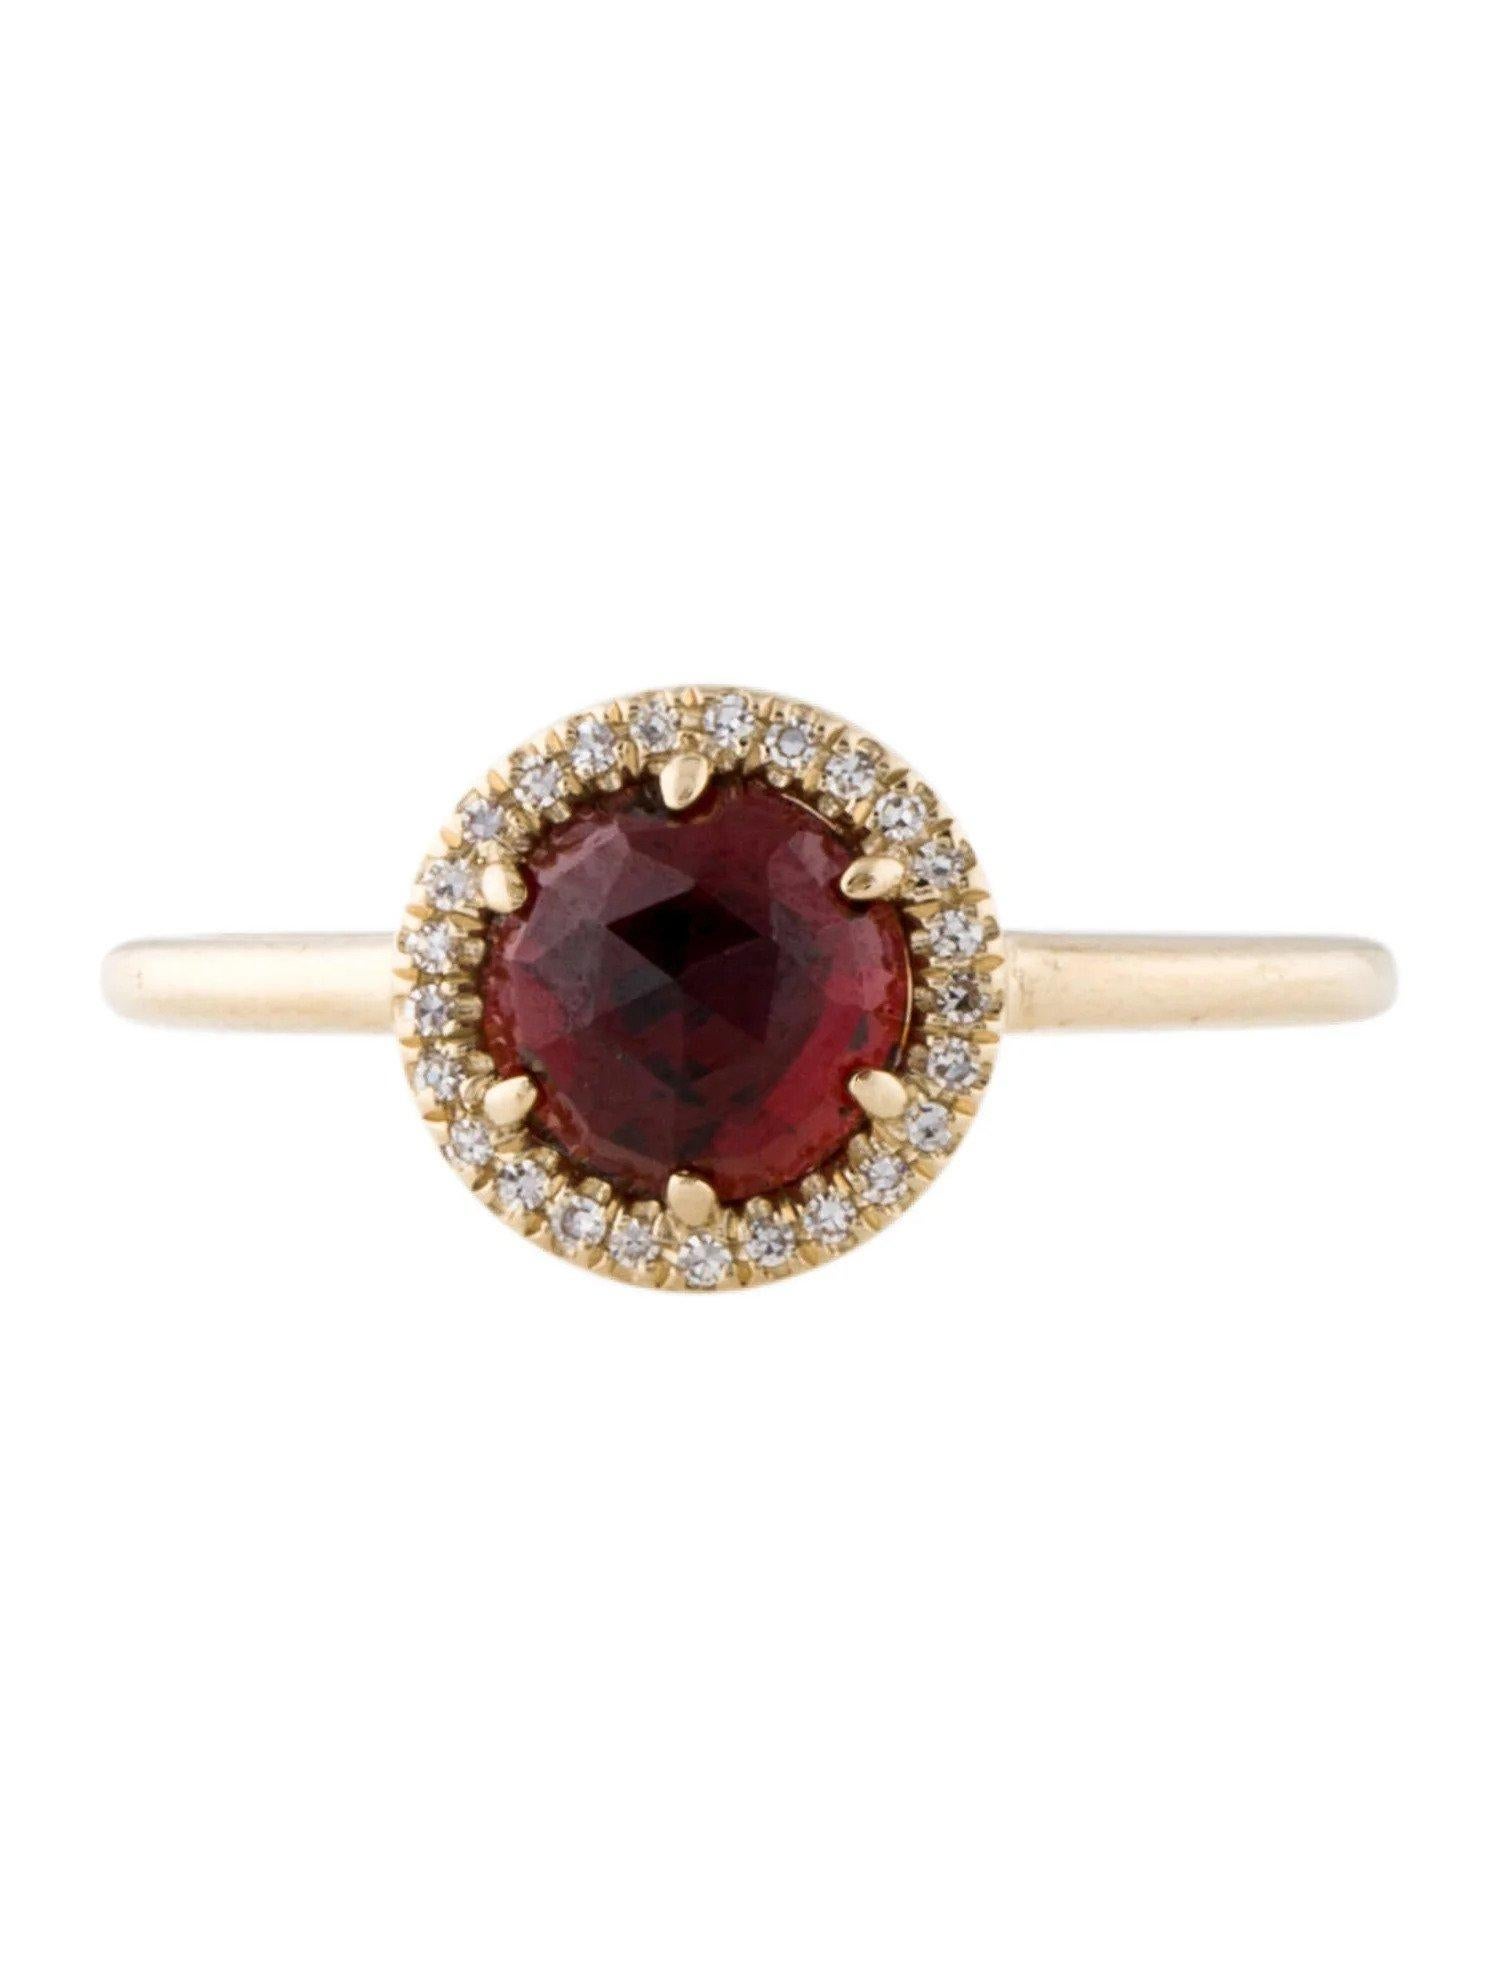 This Garnet & Diamond Ring is a stunning and timeless accessory that can add a touch of glamour and sophistication to any outfit. 

This ring features a 1.48 Carat Garnet, with a Diamond Halo comprised of 0.06 Carats of Single Cut Round White